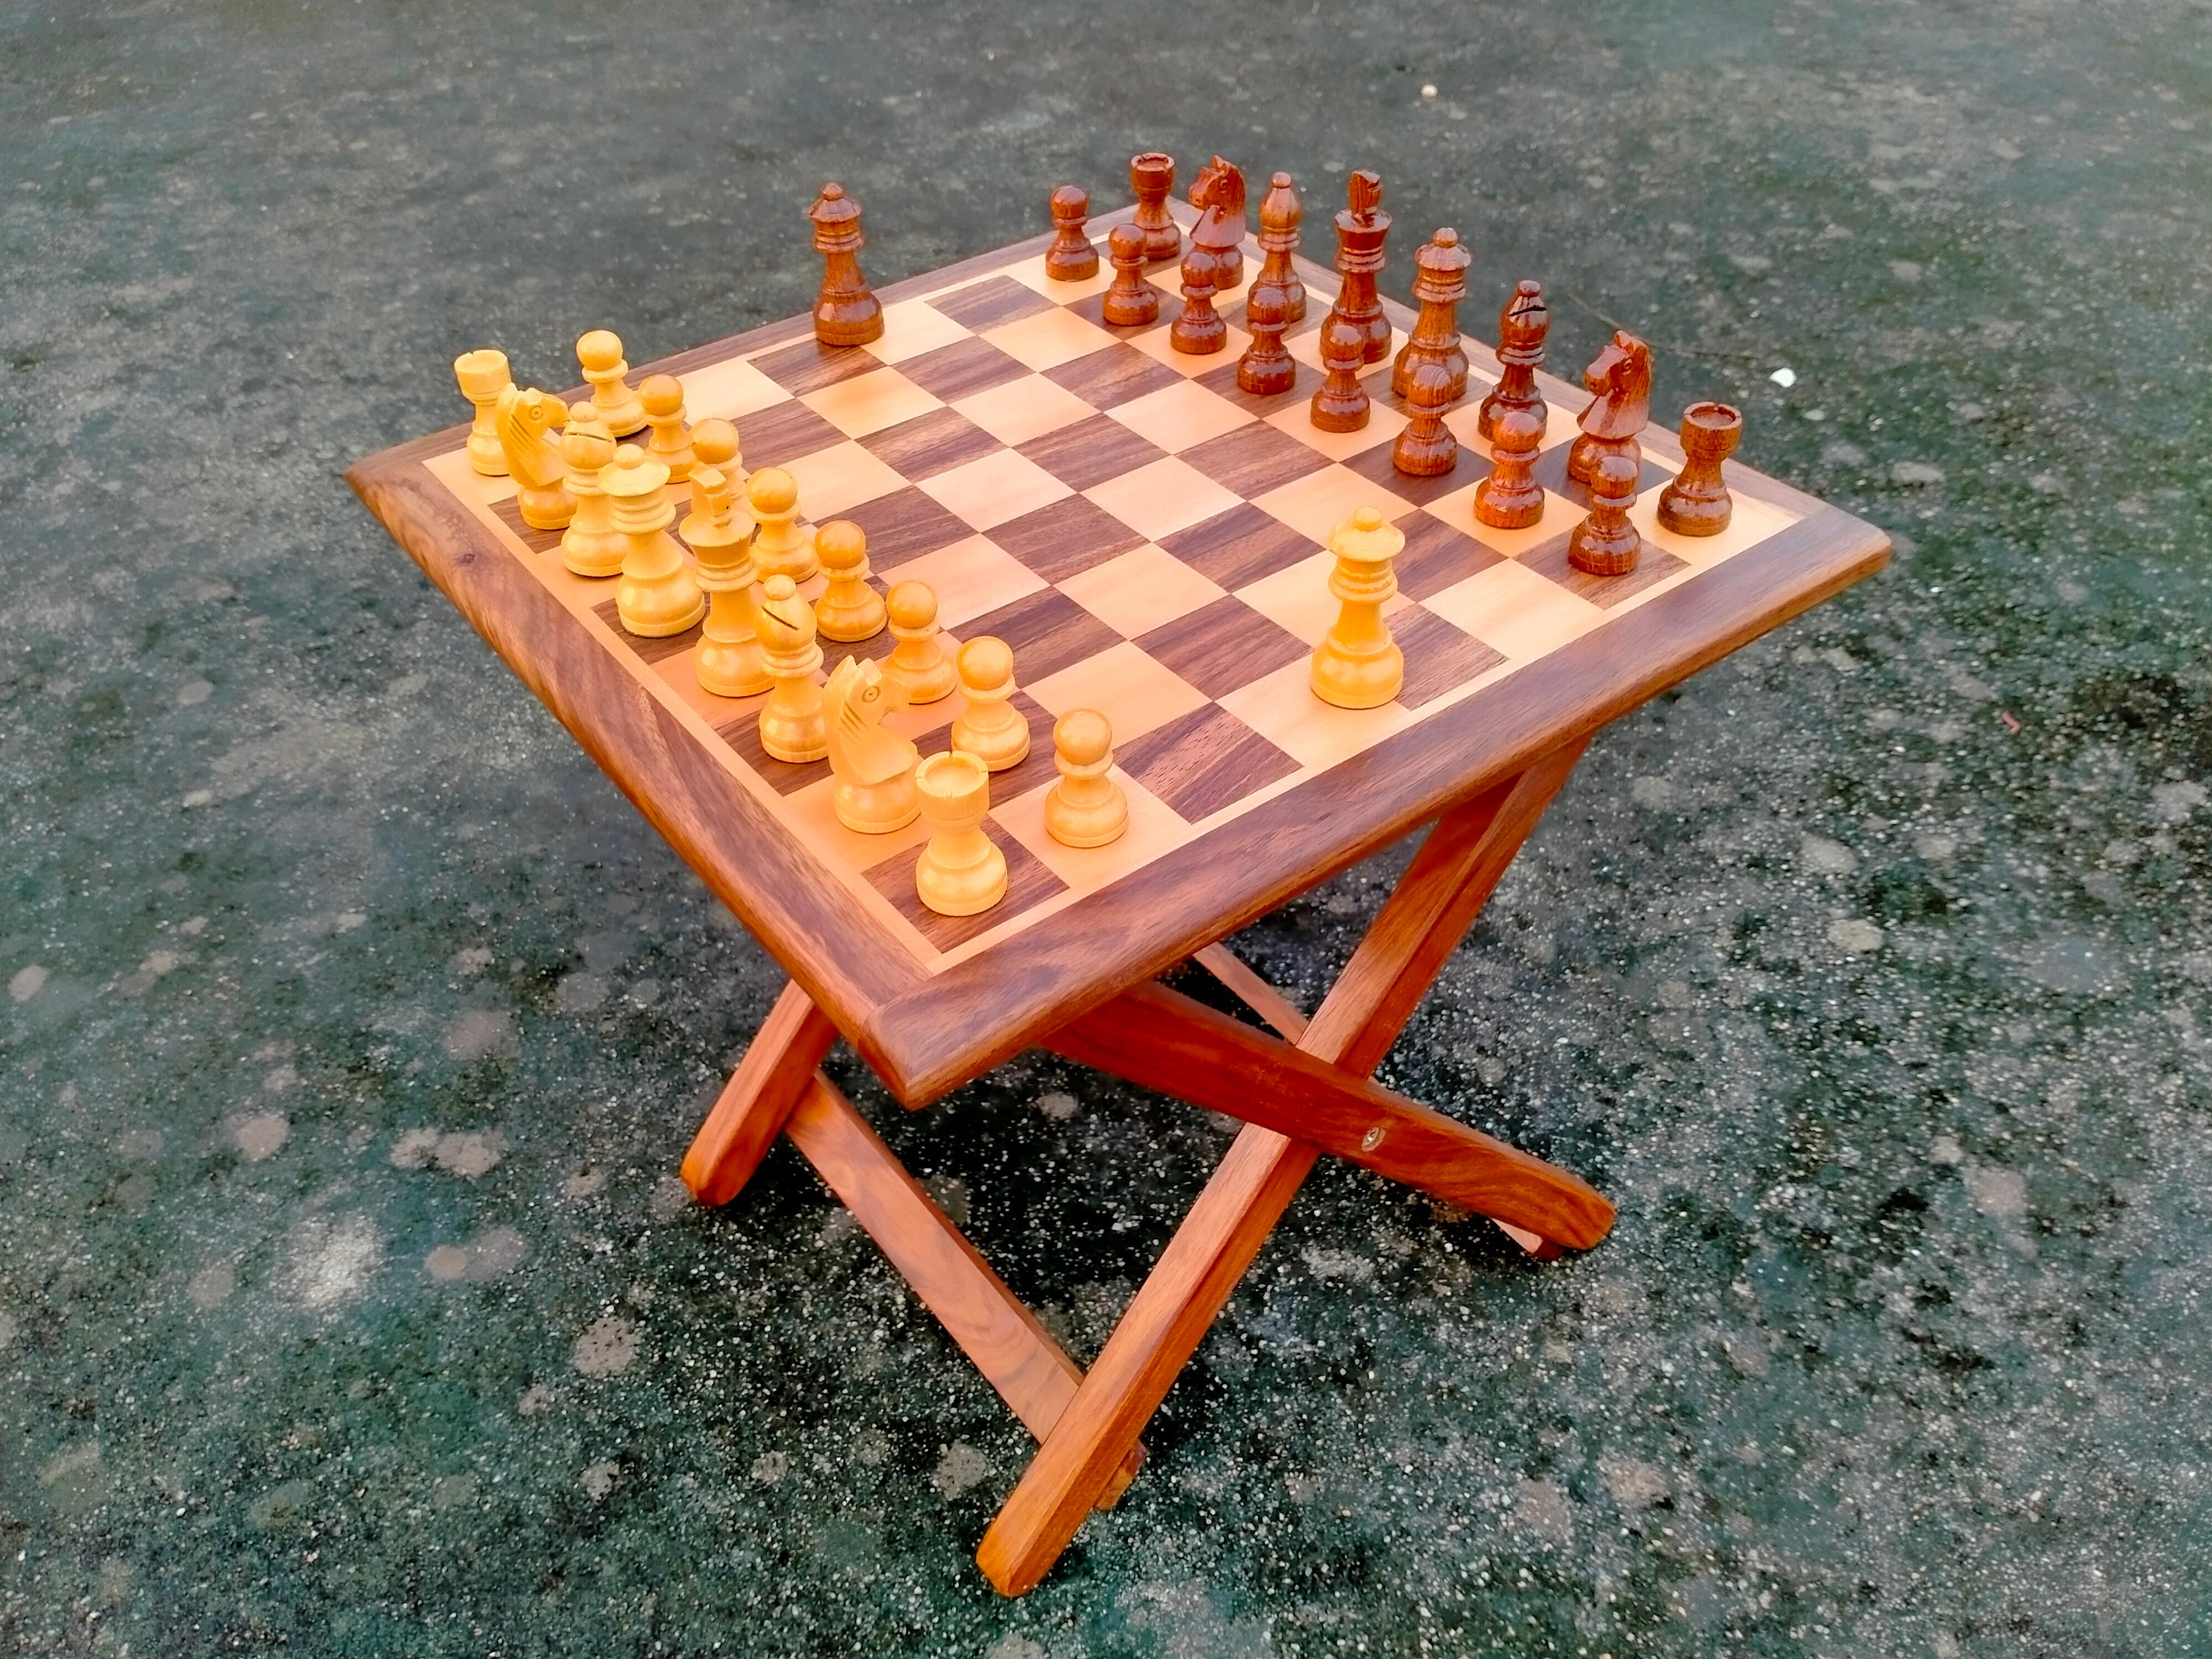 Wooden Chess Set in a Hinged Case - Irish Creative Stamping Ltd.